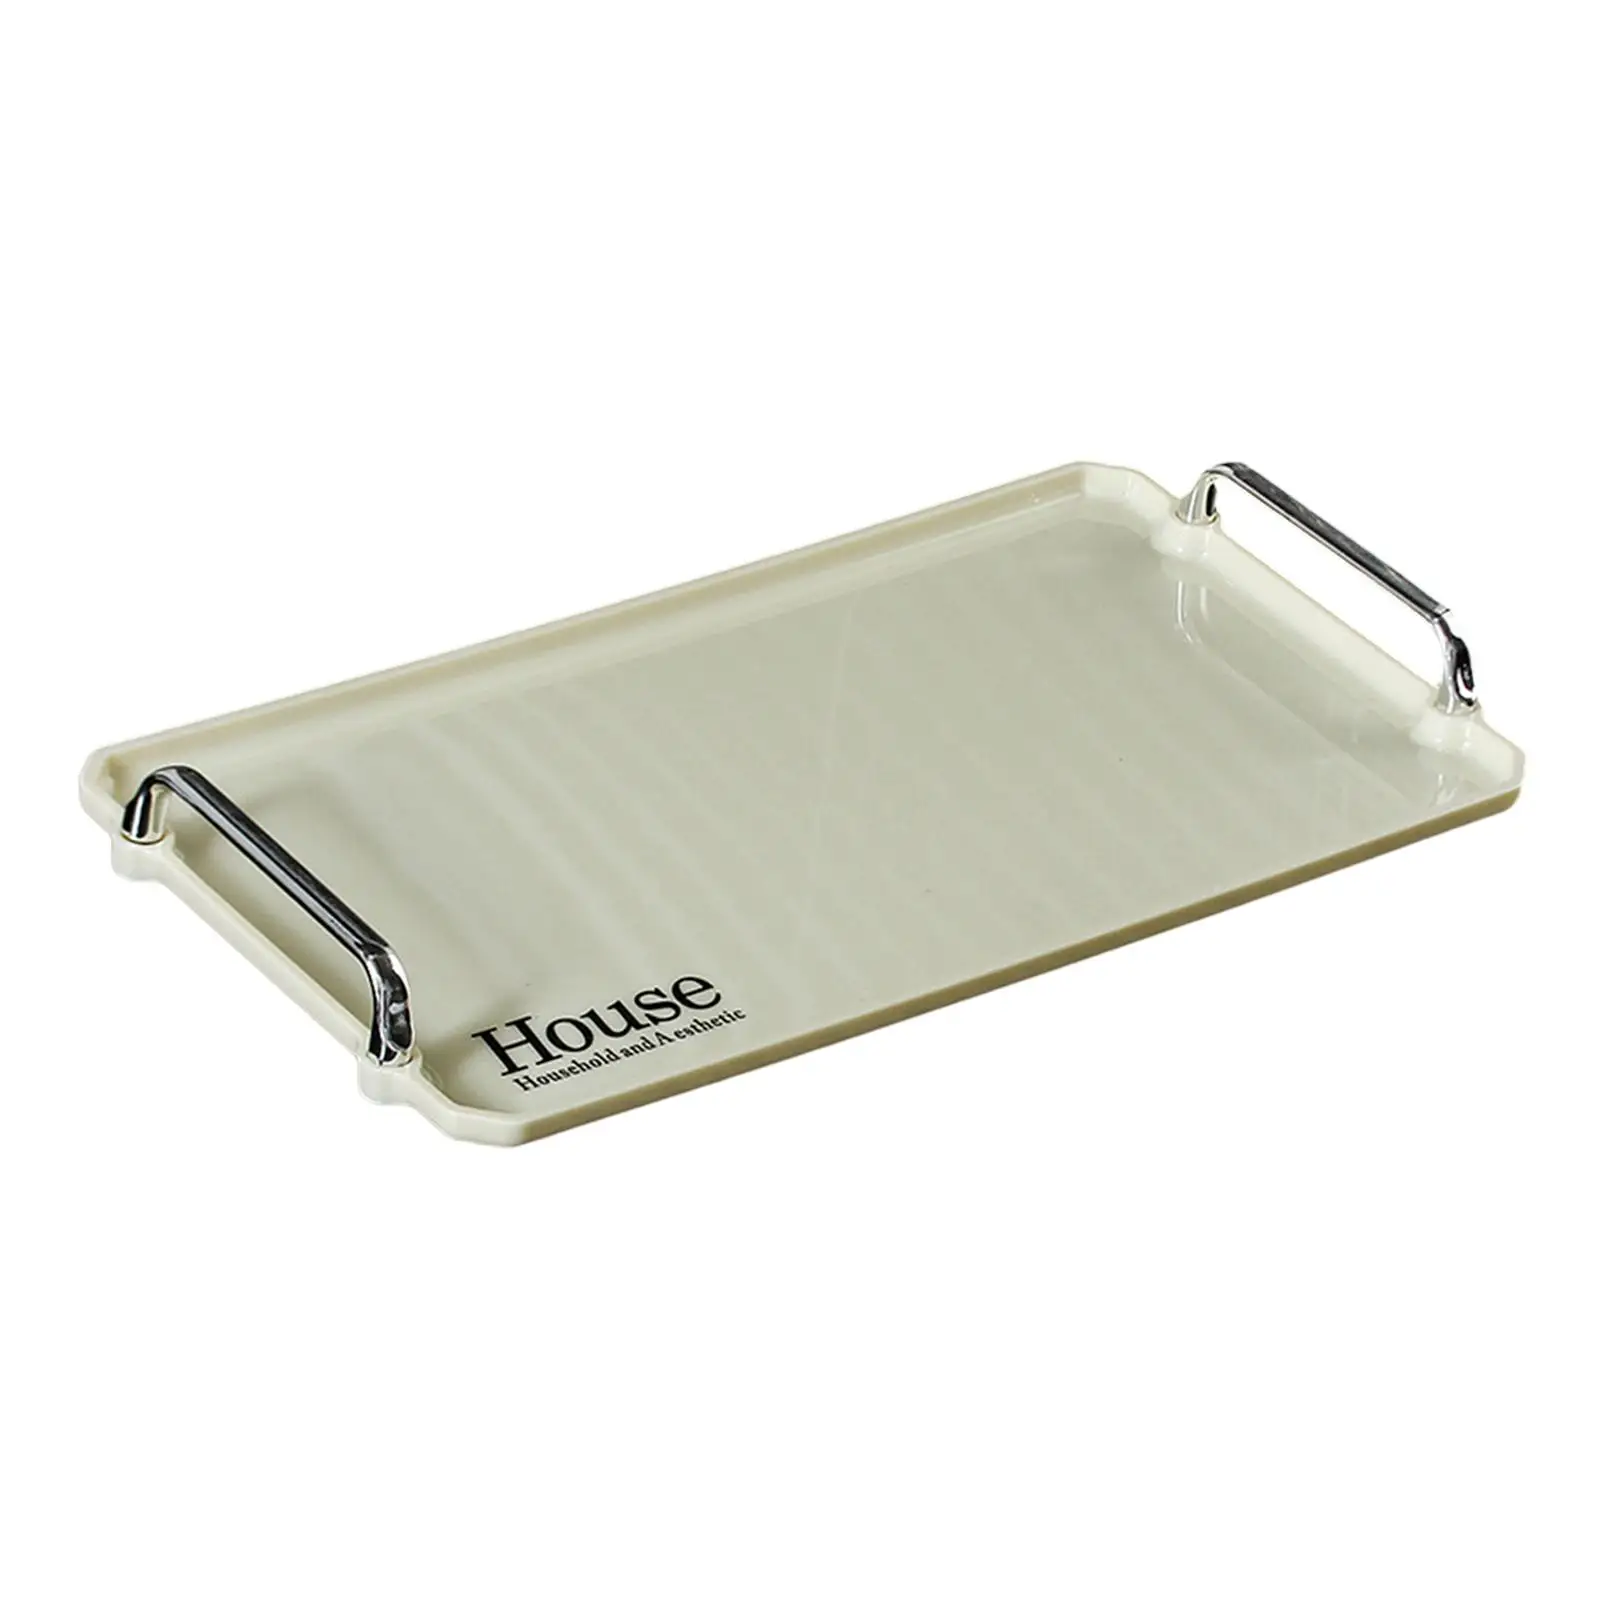 Serving Platter Food Trays Sturdy Lightweight Practical for Serving Drinks Stylish Rectangular Tray with Handle Sofa Couch Tray